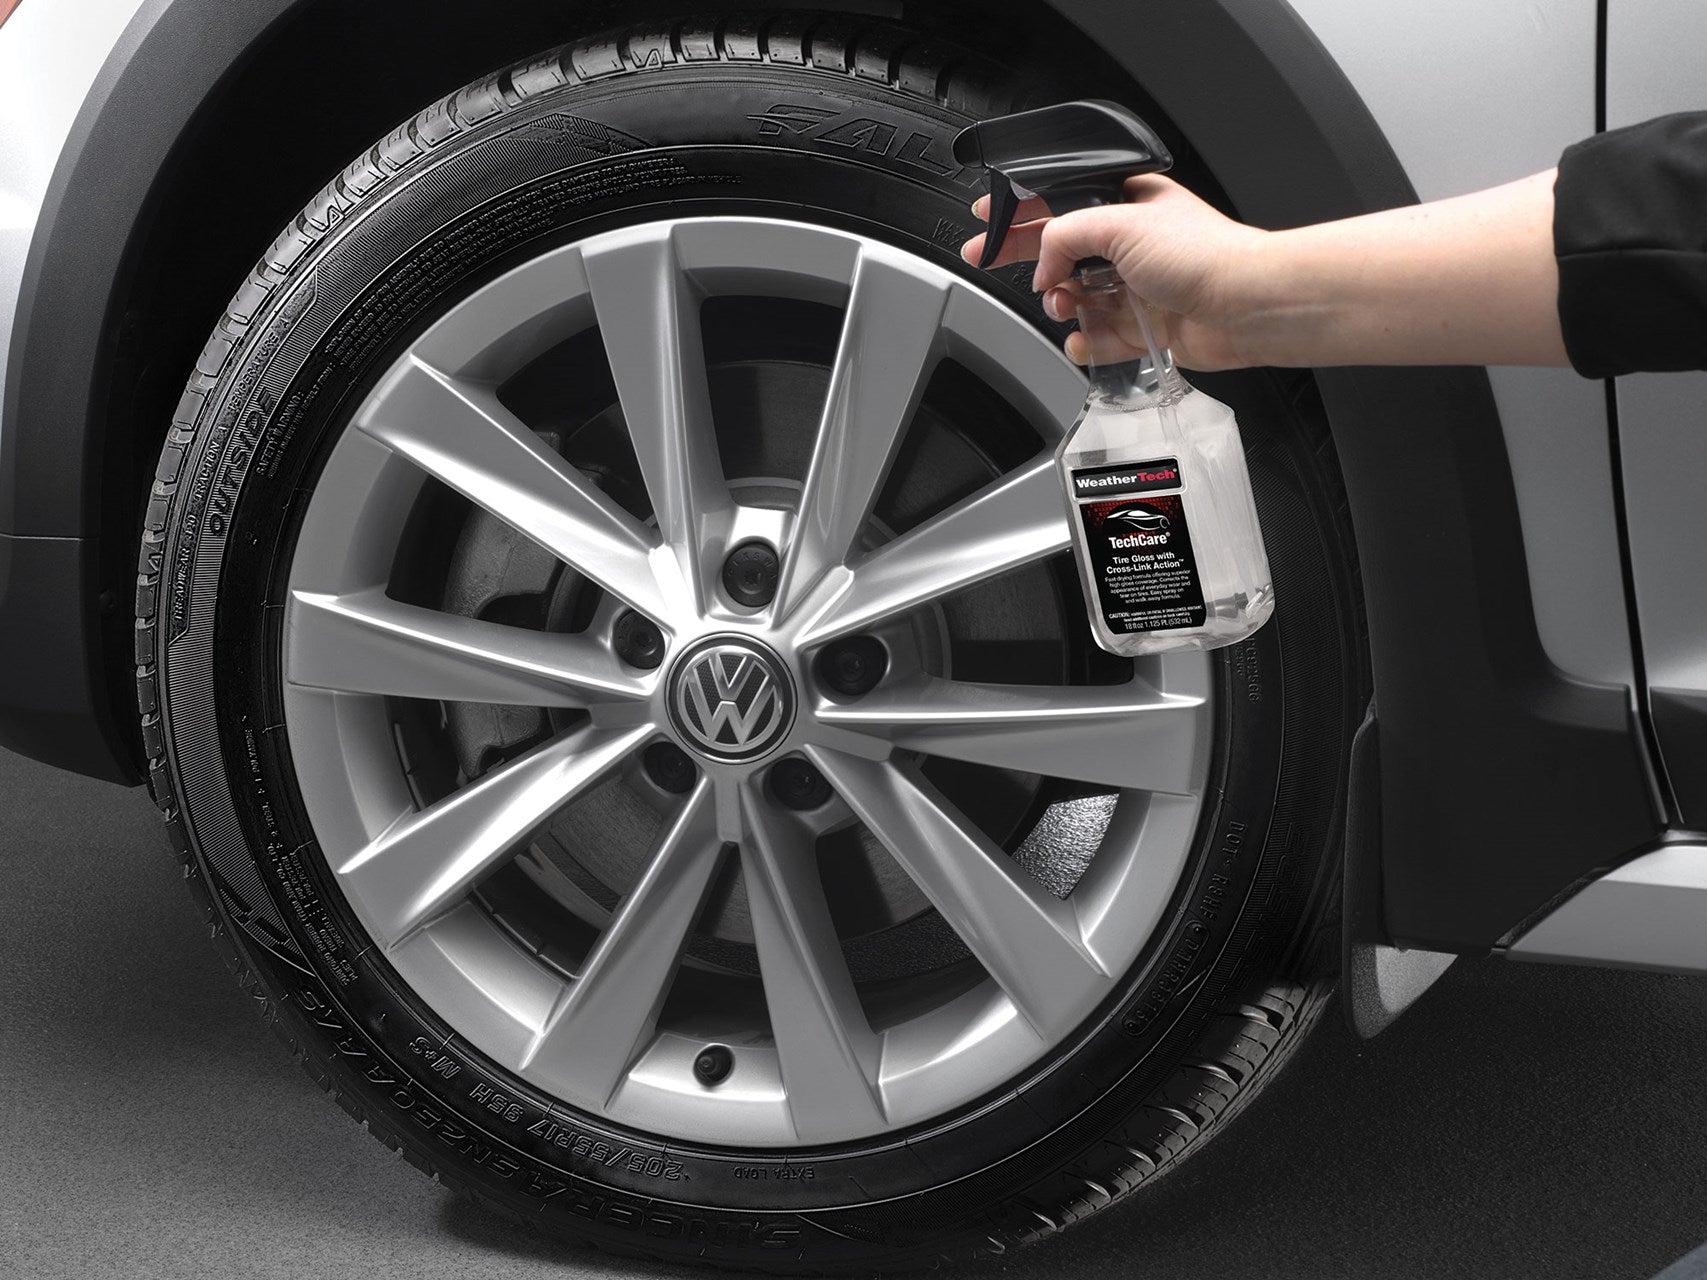 TechCare Tire Gloss with Cross-Link Action